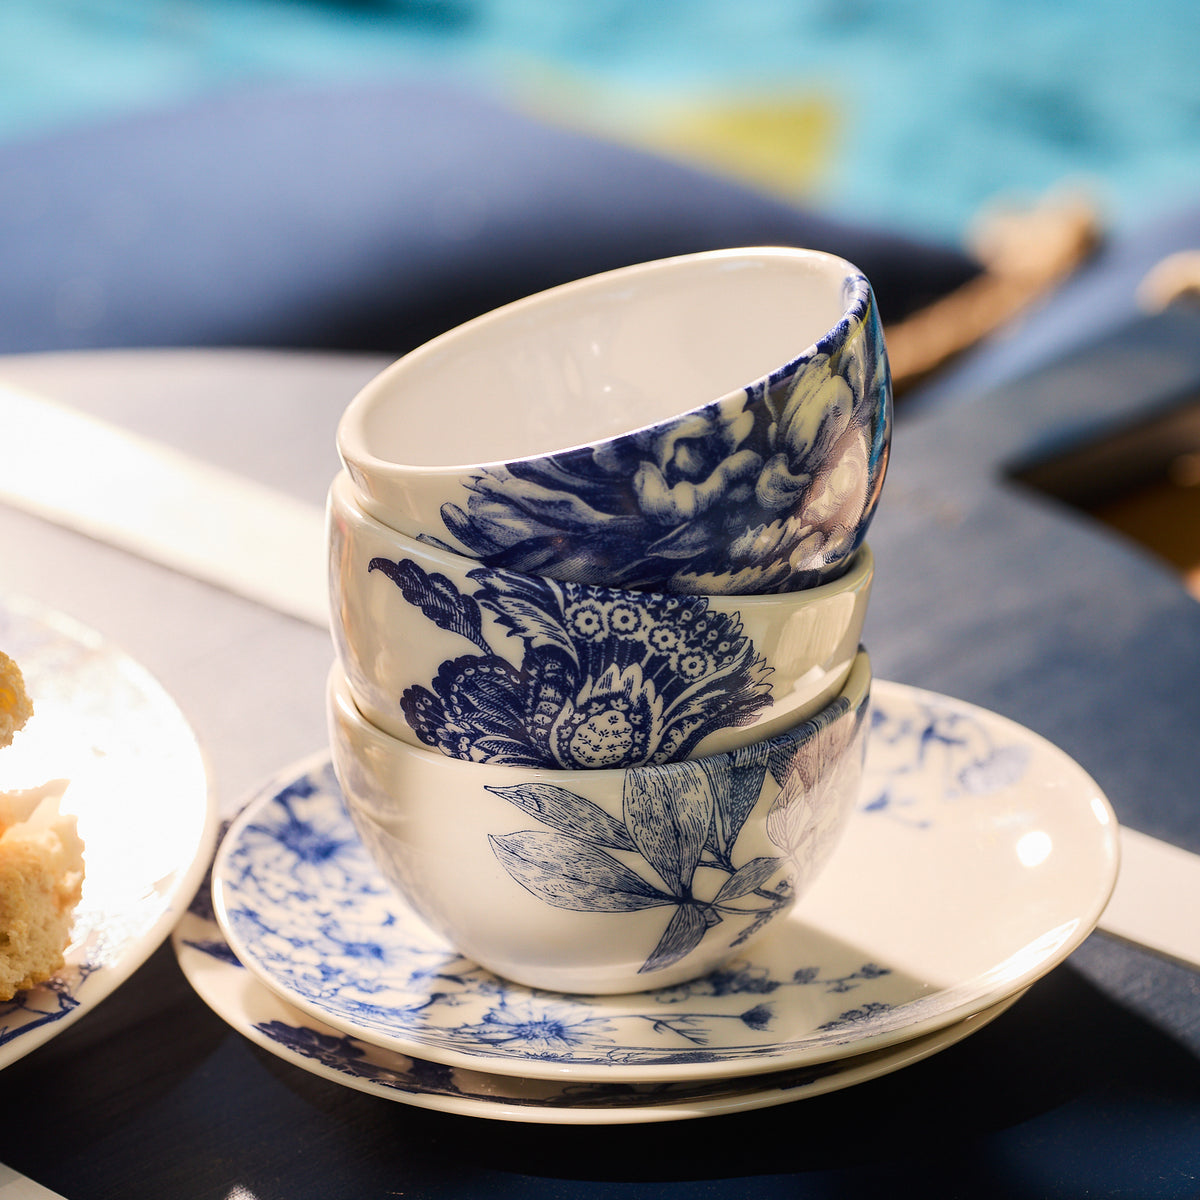 Three Arbor Snack Bowls from Caskata Artisanal Home, featuring blue floral designs nestled together inside a matching saucer, are placed on a dark blue table. Sunlight highlights the intricate patterns of the premium porcelain bowls, resembling leafy branches in delicate detail.